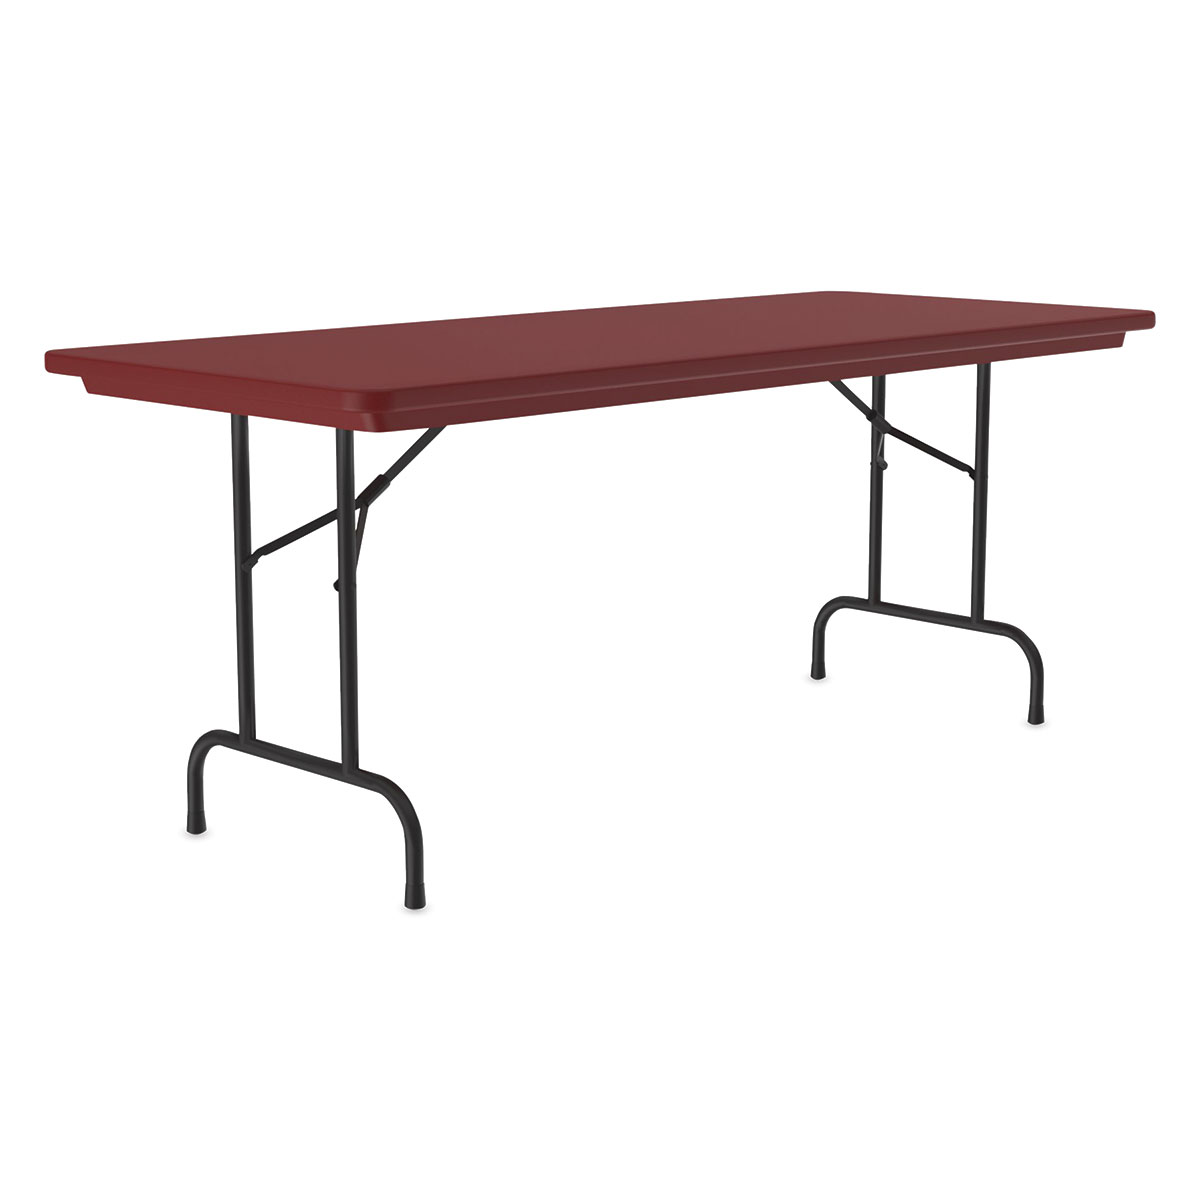 Correll Plastic Resin Folding Table - 30' x 72', Red, Fixed Height